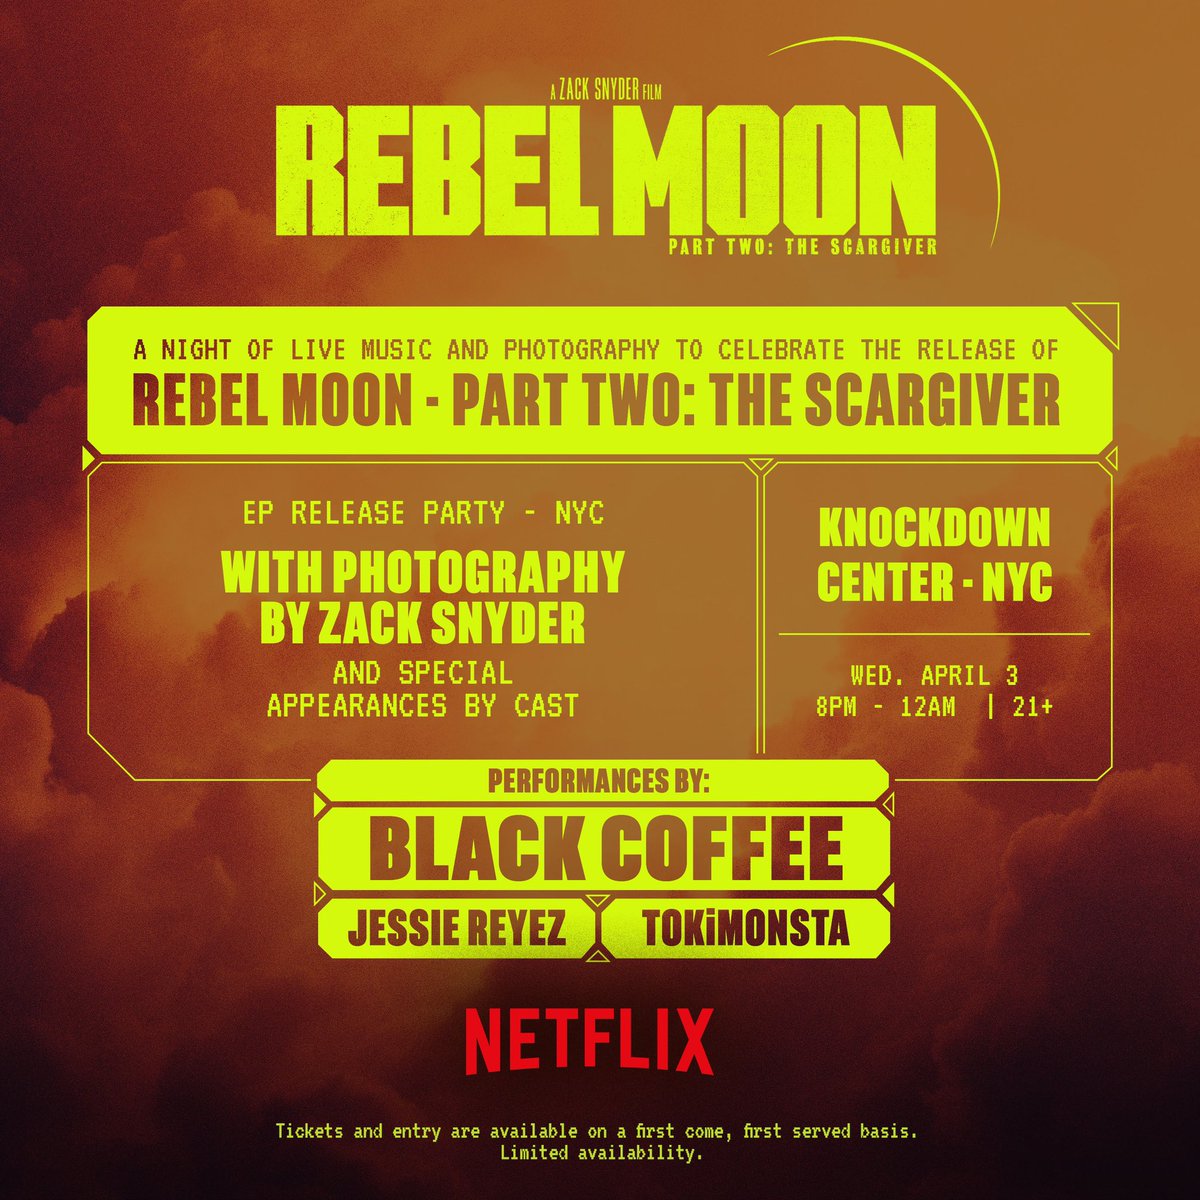 Hola April 3rd I’m doin a performance for the release of the movie “Rebel Moon ll”. Rsvp here. Limited entry. K bi. link.dice.fm/rebelmoonparty